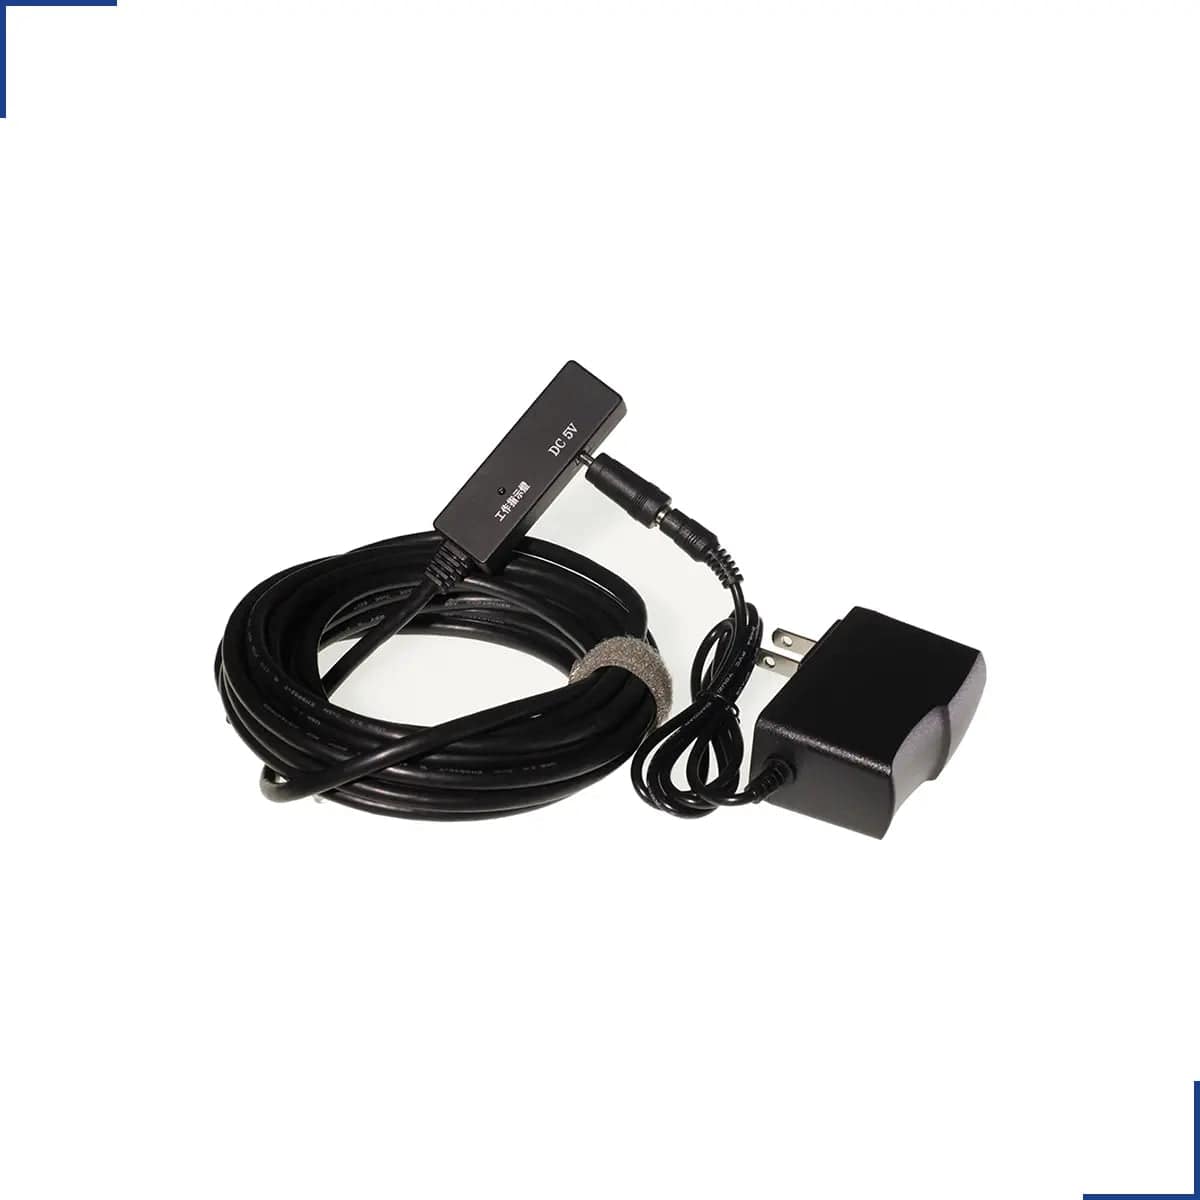 QHYCCD Accessory QHYCCD DC 5V 5-meter/10-meter USB3.0 Active Extension Cable